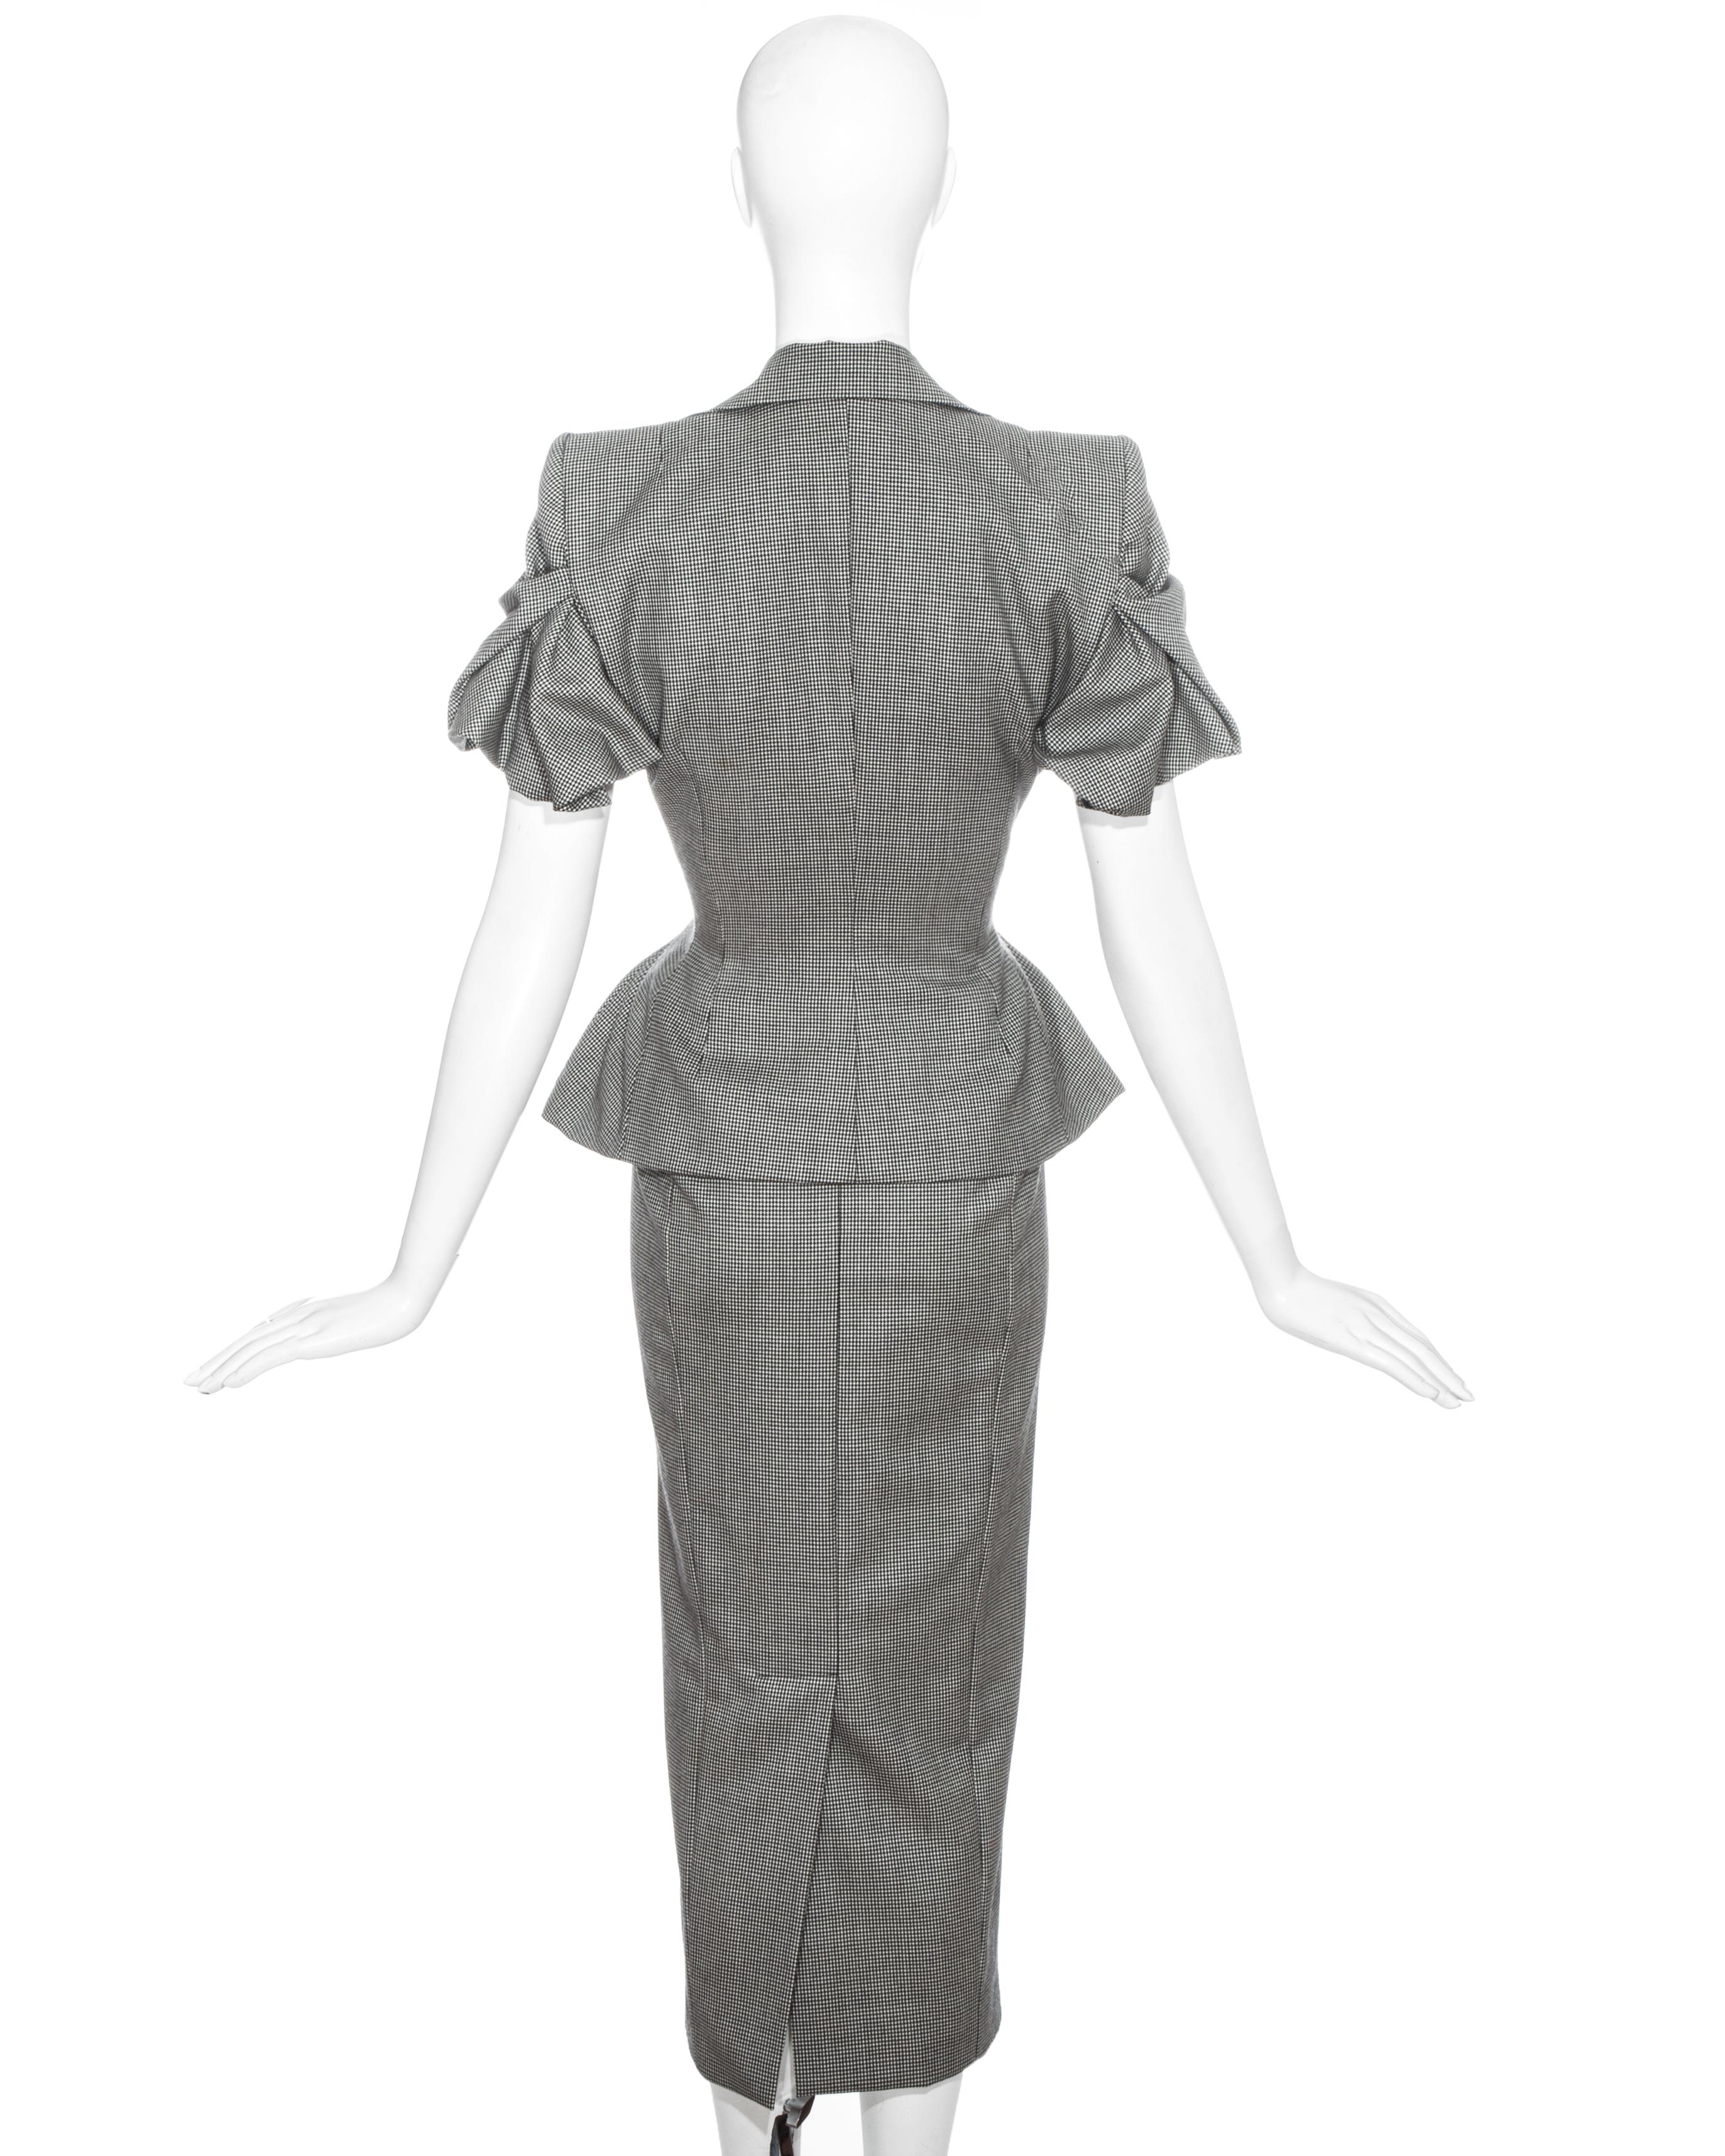 Women's John Galliano hounds tooth check wool skirt suit, ss 1995